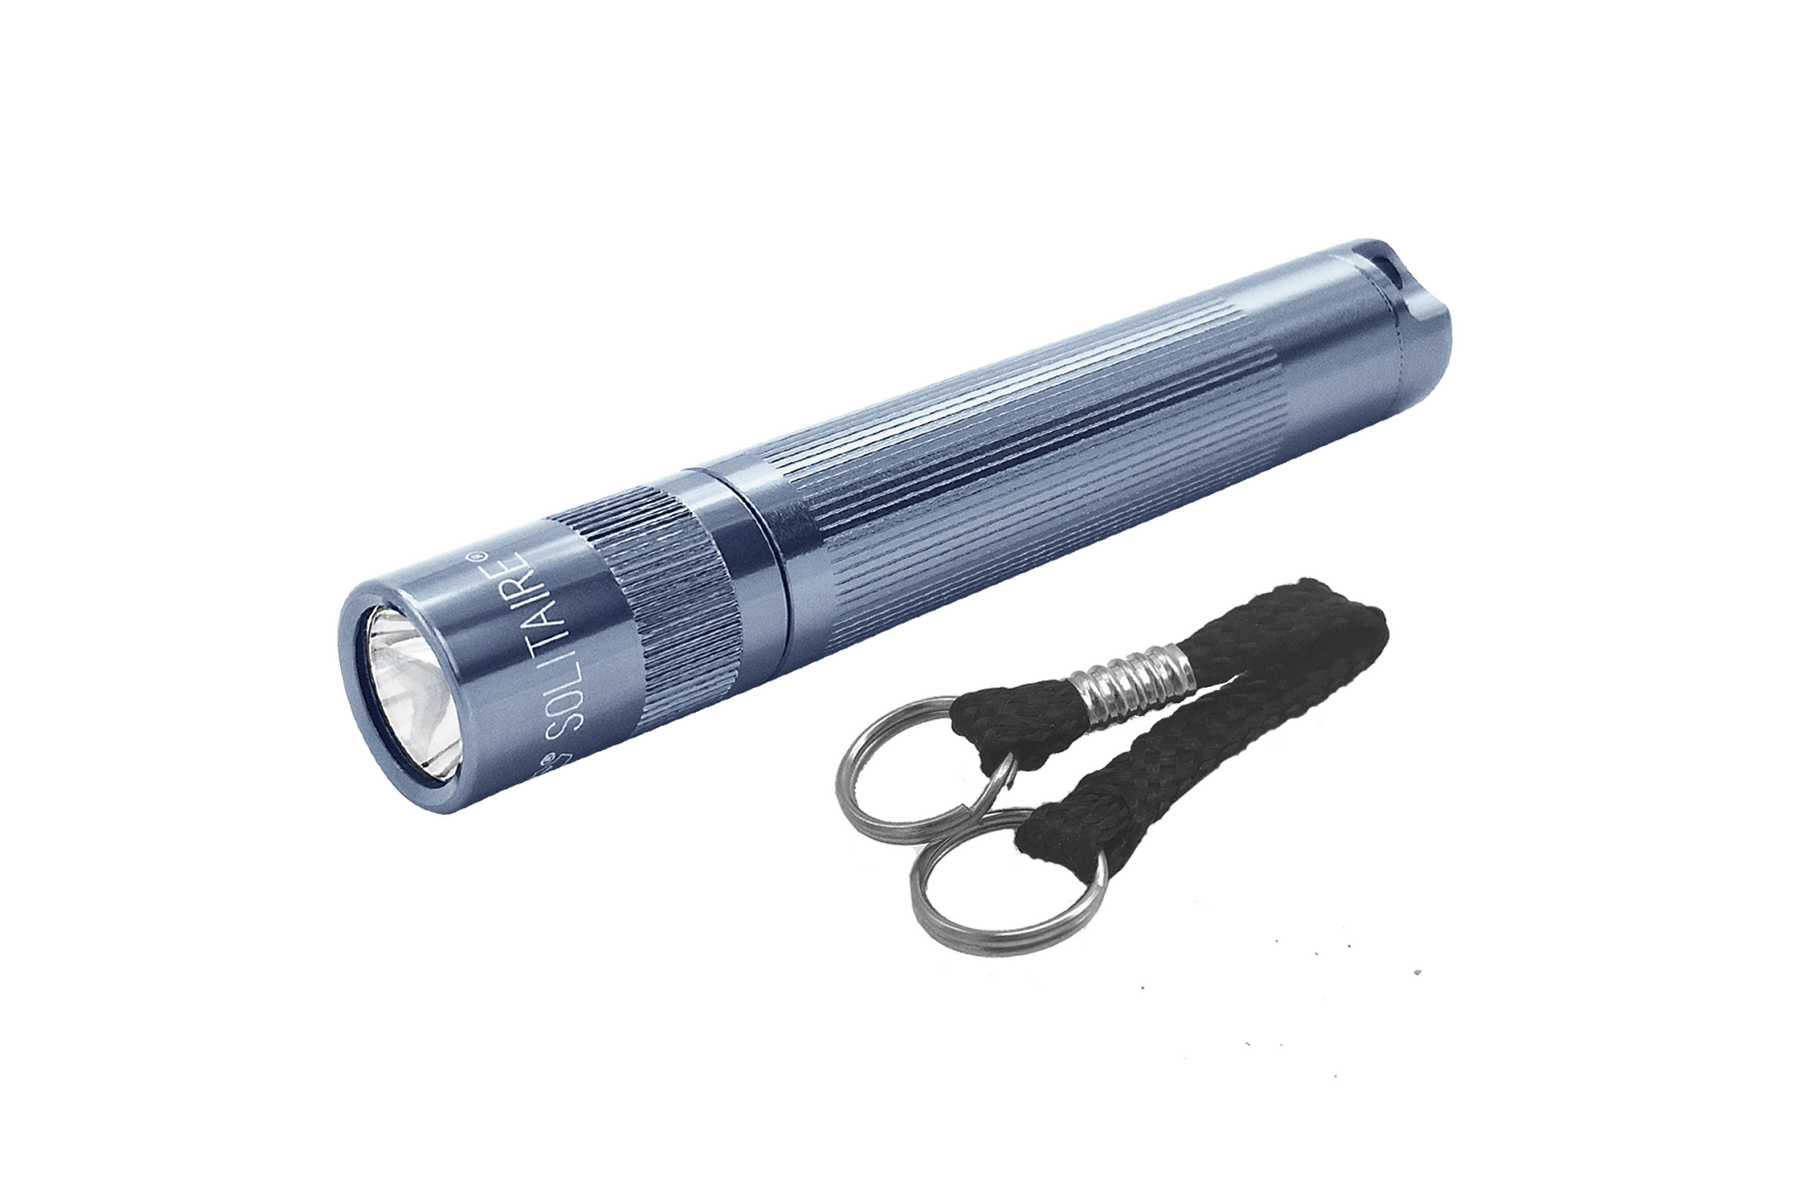 Maglite Lampe Torche Solitaire LED - 1 Pile Type-AAA Couleur Bleu